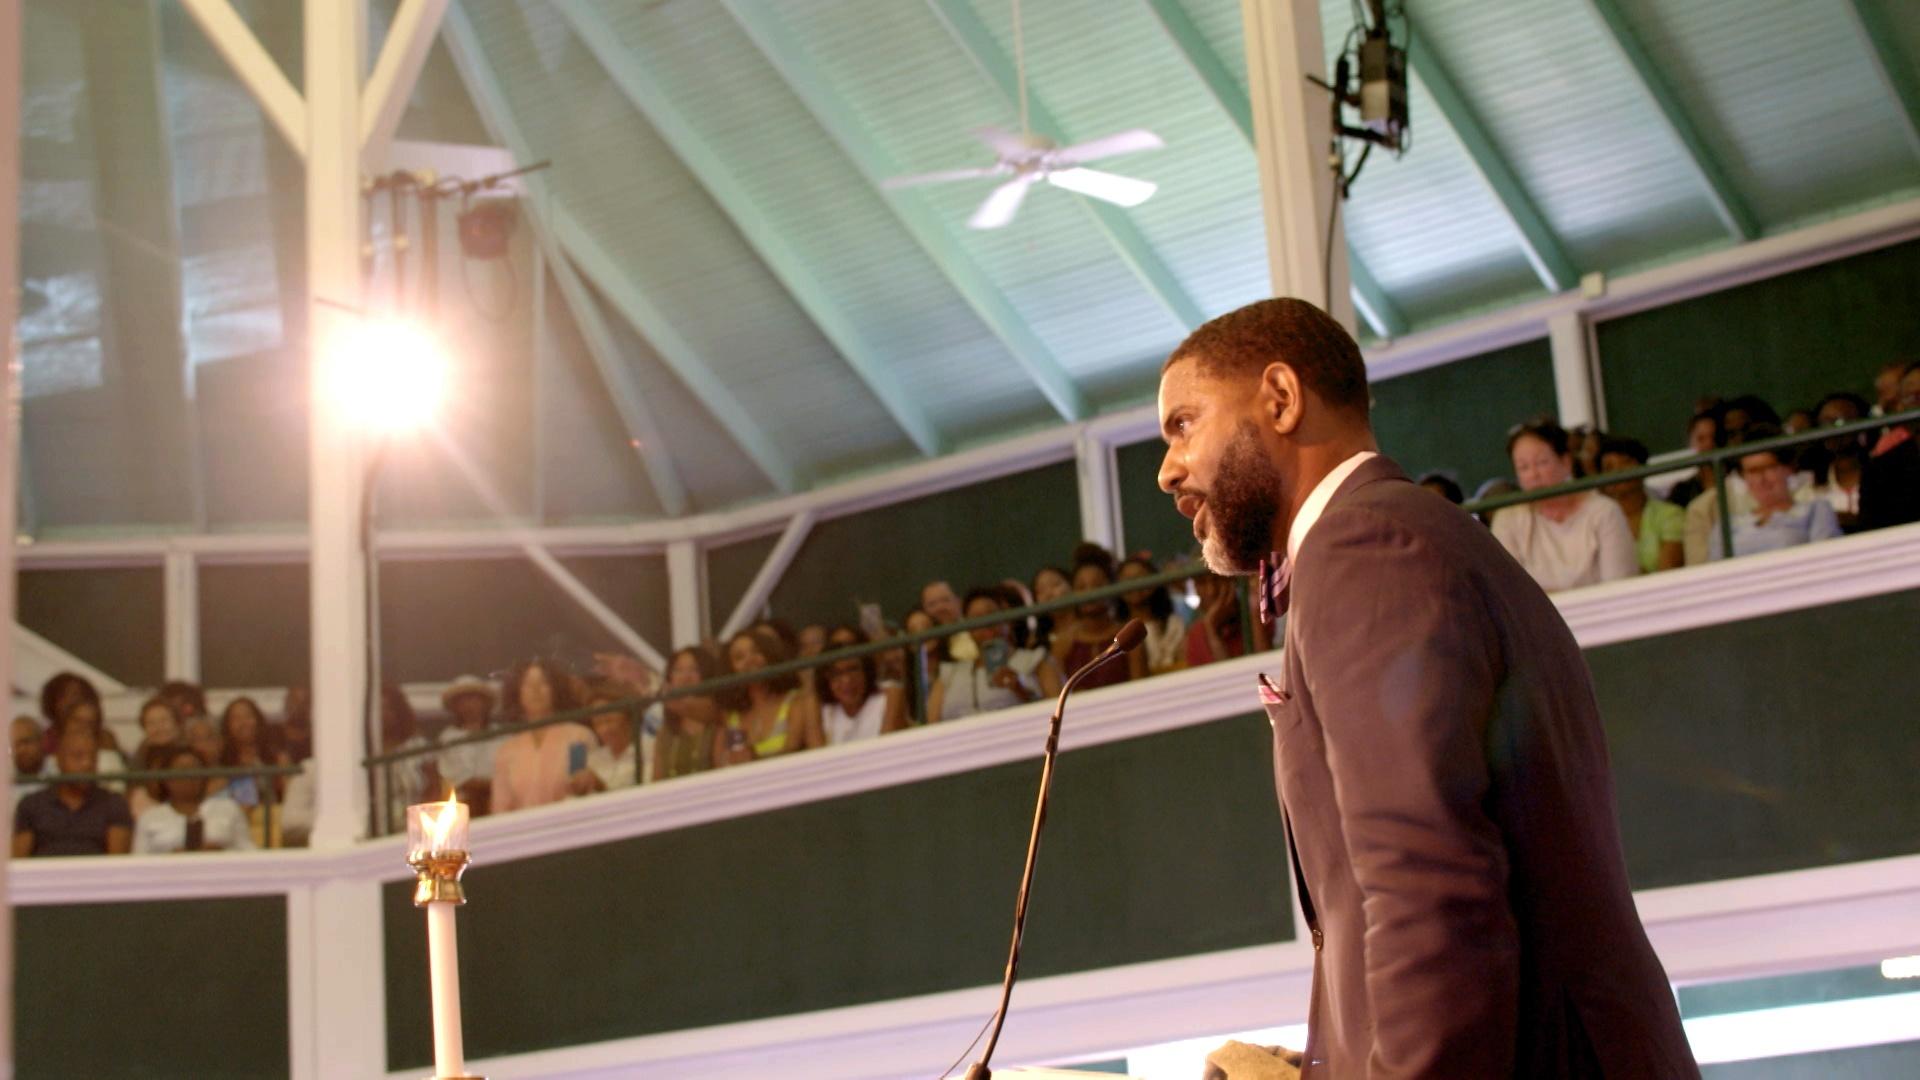 A young man in a suit with a bowtie and pocket square stands at a microphone with a crowded church behind him